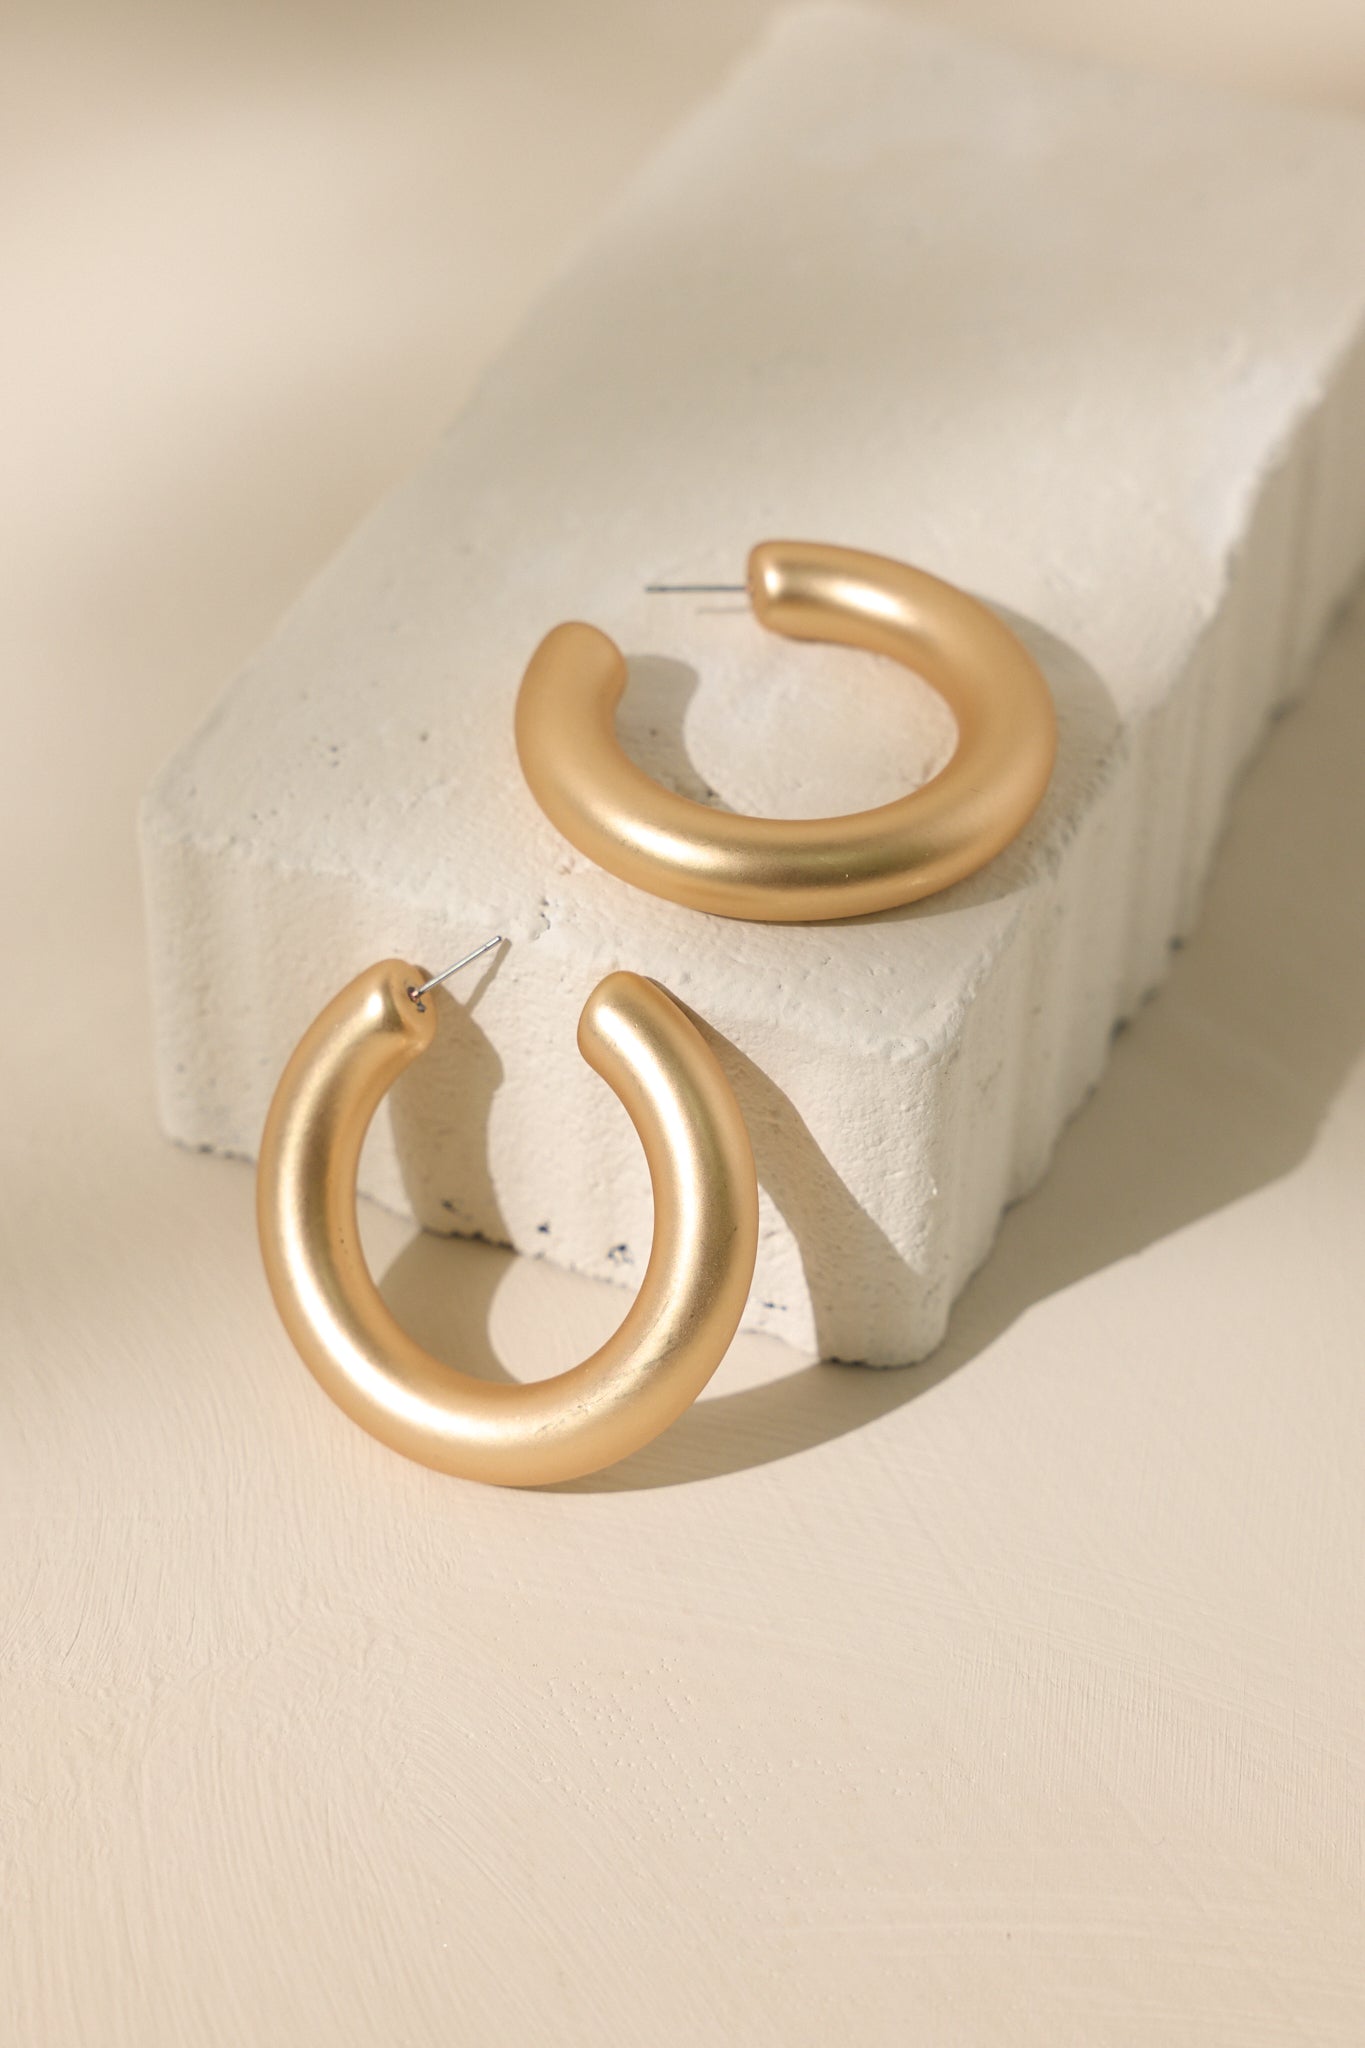 Stand alone view of these gold hoop earrings featuring a matte gold finish, thick design, and a secure post backing.